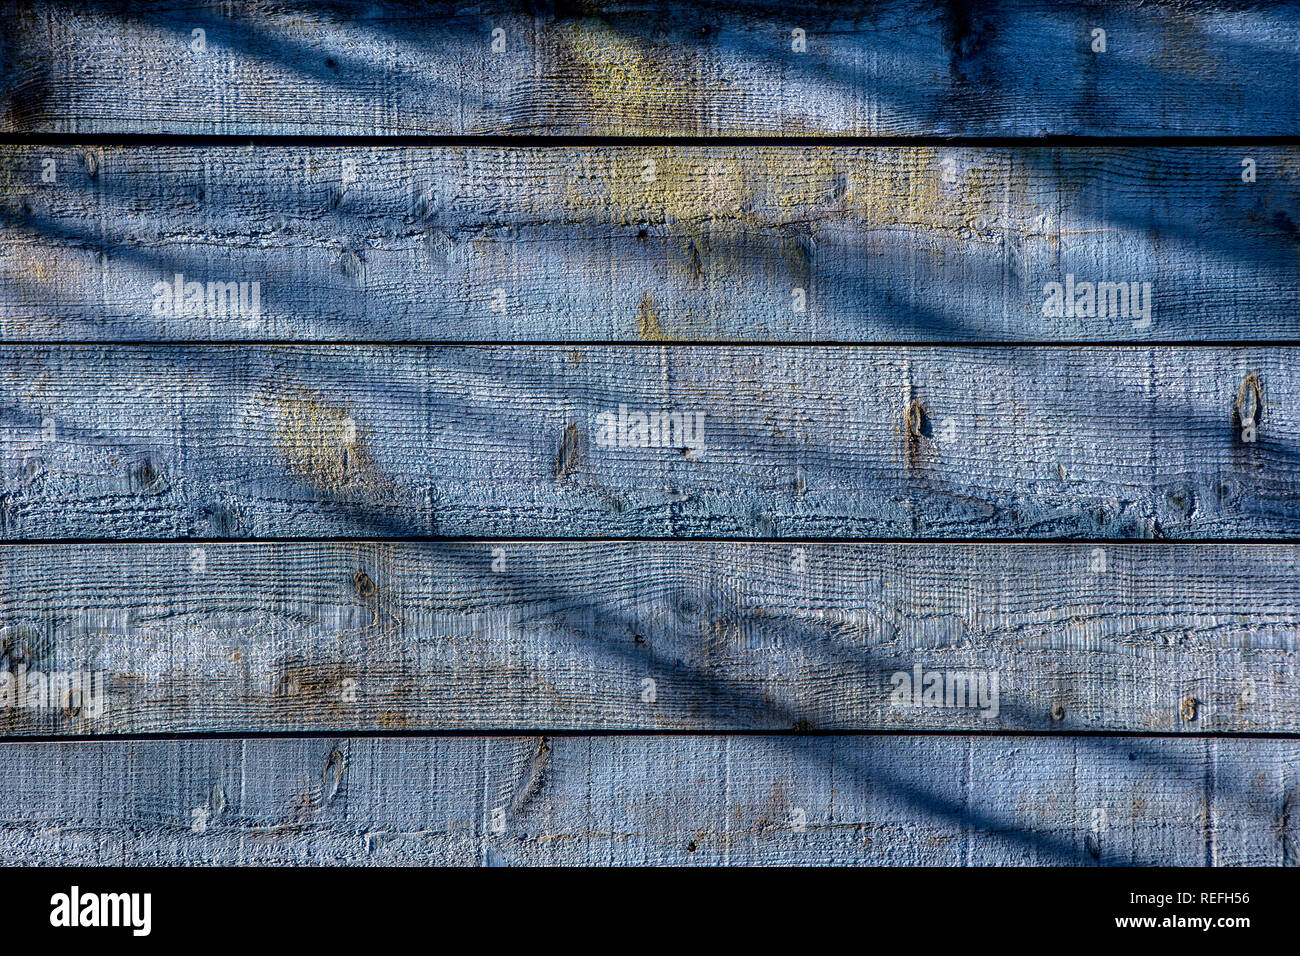 Blue wooden panels with shadows cast on them Stock Photo